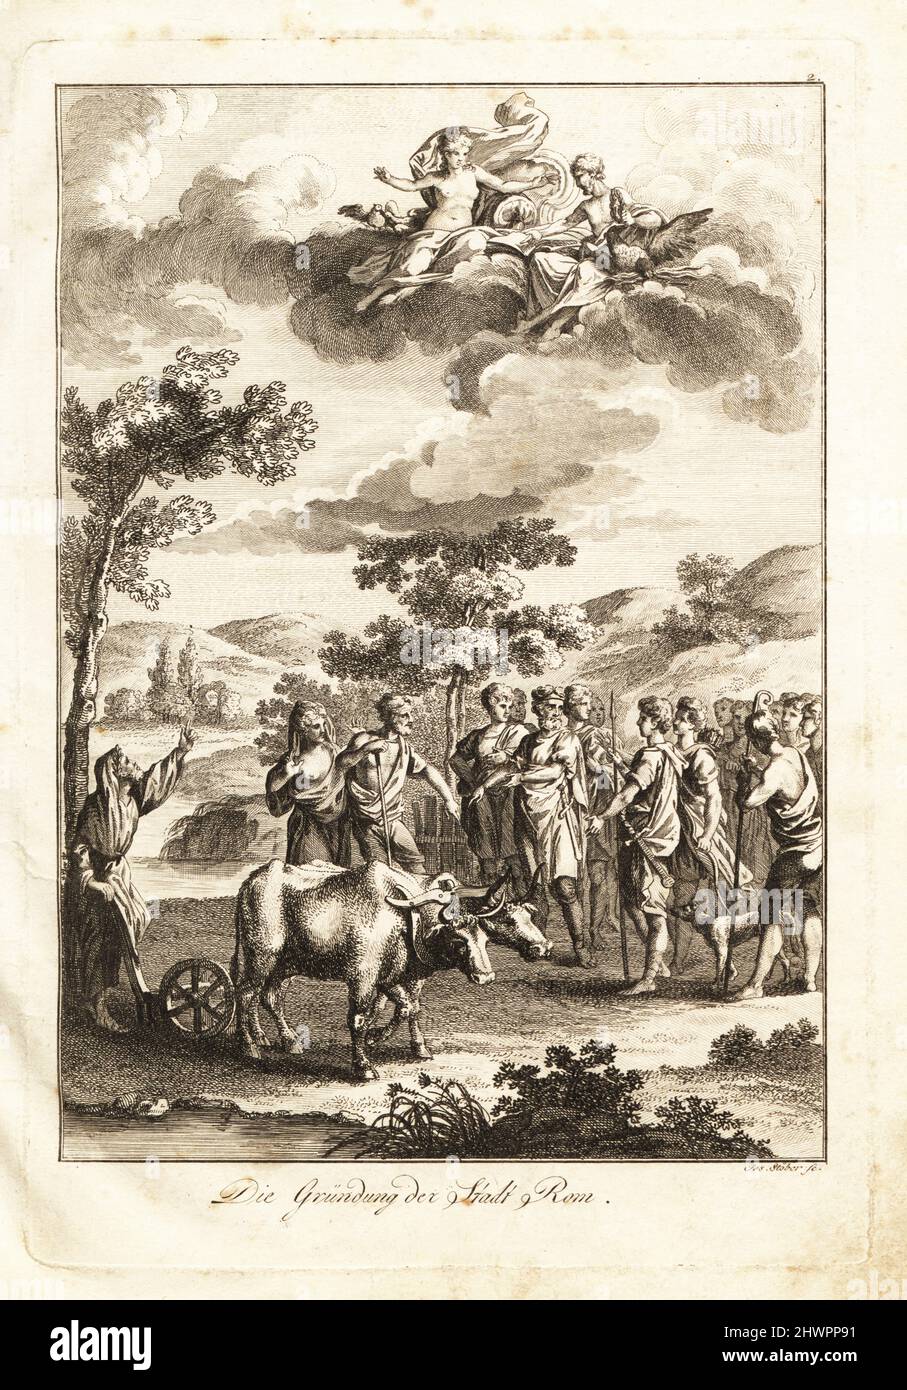 Romulus and Remus and the foundation of Rome. A priest points to the gods Jupiter and Venus in the clouds above the twins and their parents Faustulus and Acca Larentia. Fondation de Rome. Copperplate engraving by Joseph Stöber after a design by Hubert-François Gravelot from Professor Joseph Rudolf Zappe’s Gemalde aus der romischen Geschichte, Pictures of Roman History, Joseph Schalbacher, Vienna, 1800. German edition of Abbe Claude Francois Xavier Millot’s Abrege de l’Histoire Romaine. Stock Photo